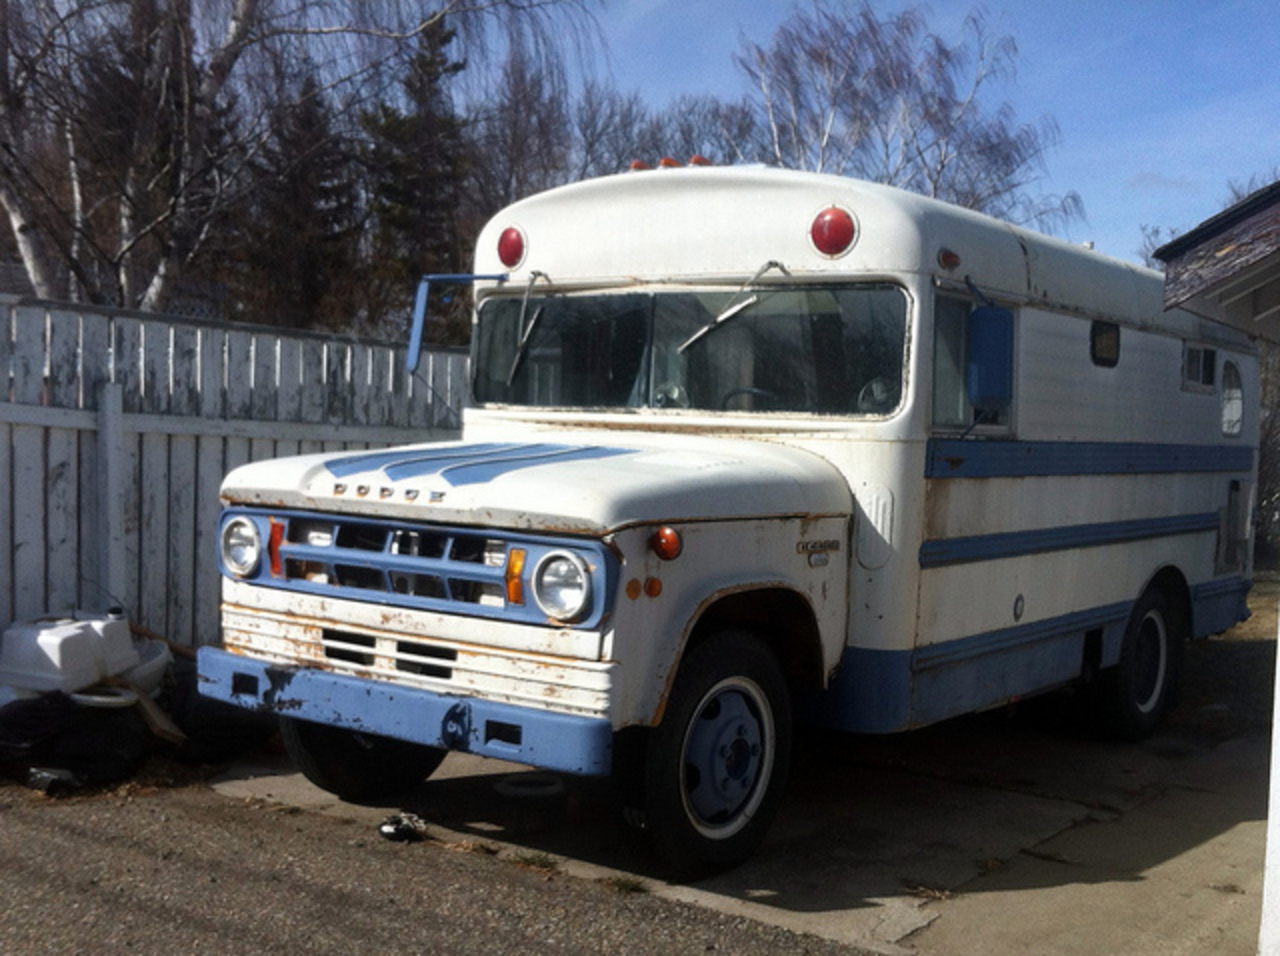 Old Dodge school bus converted to RV. Used to be reasonably common to